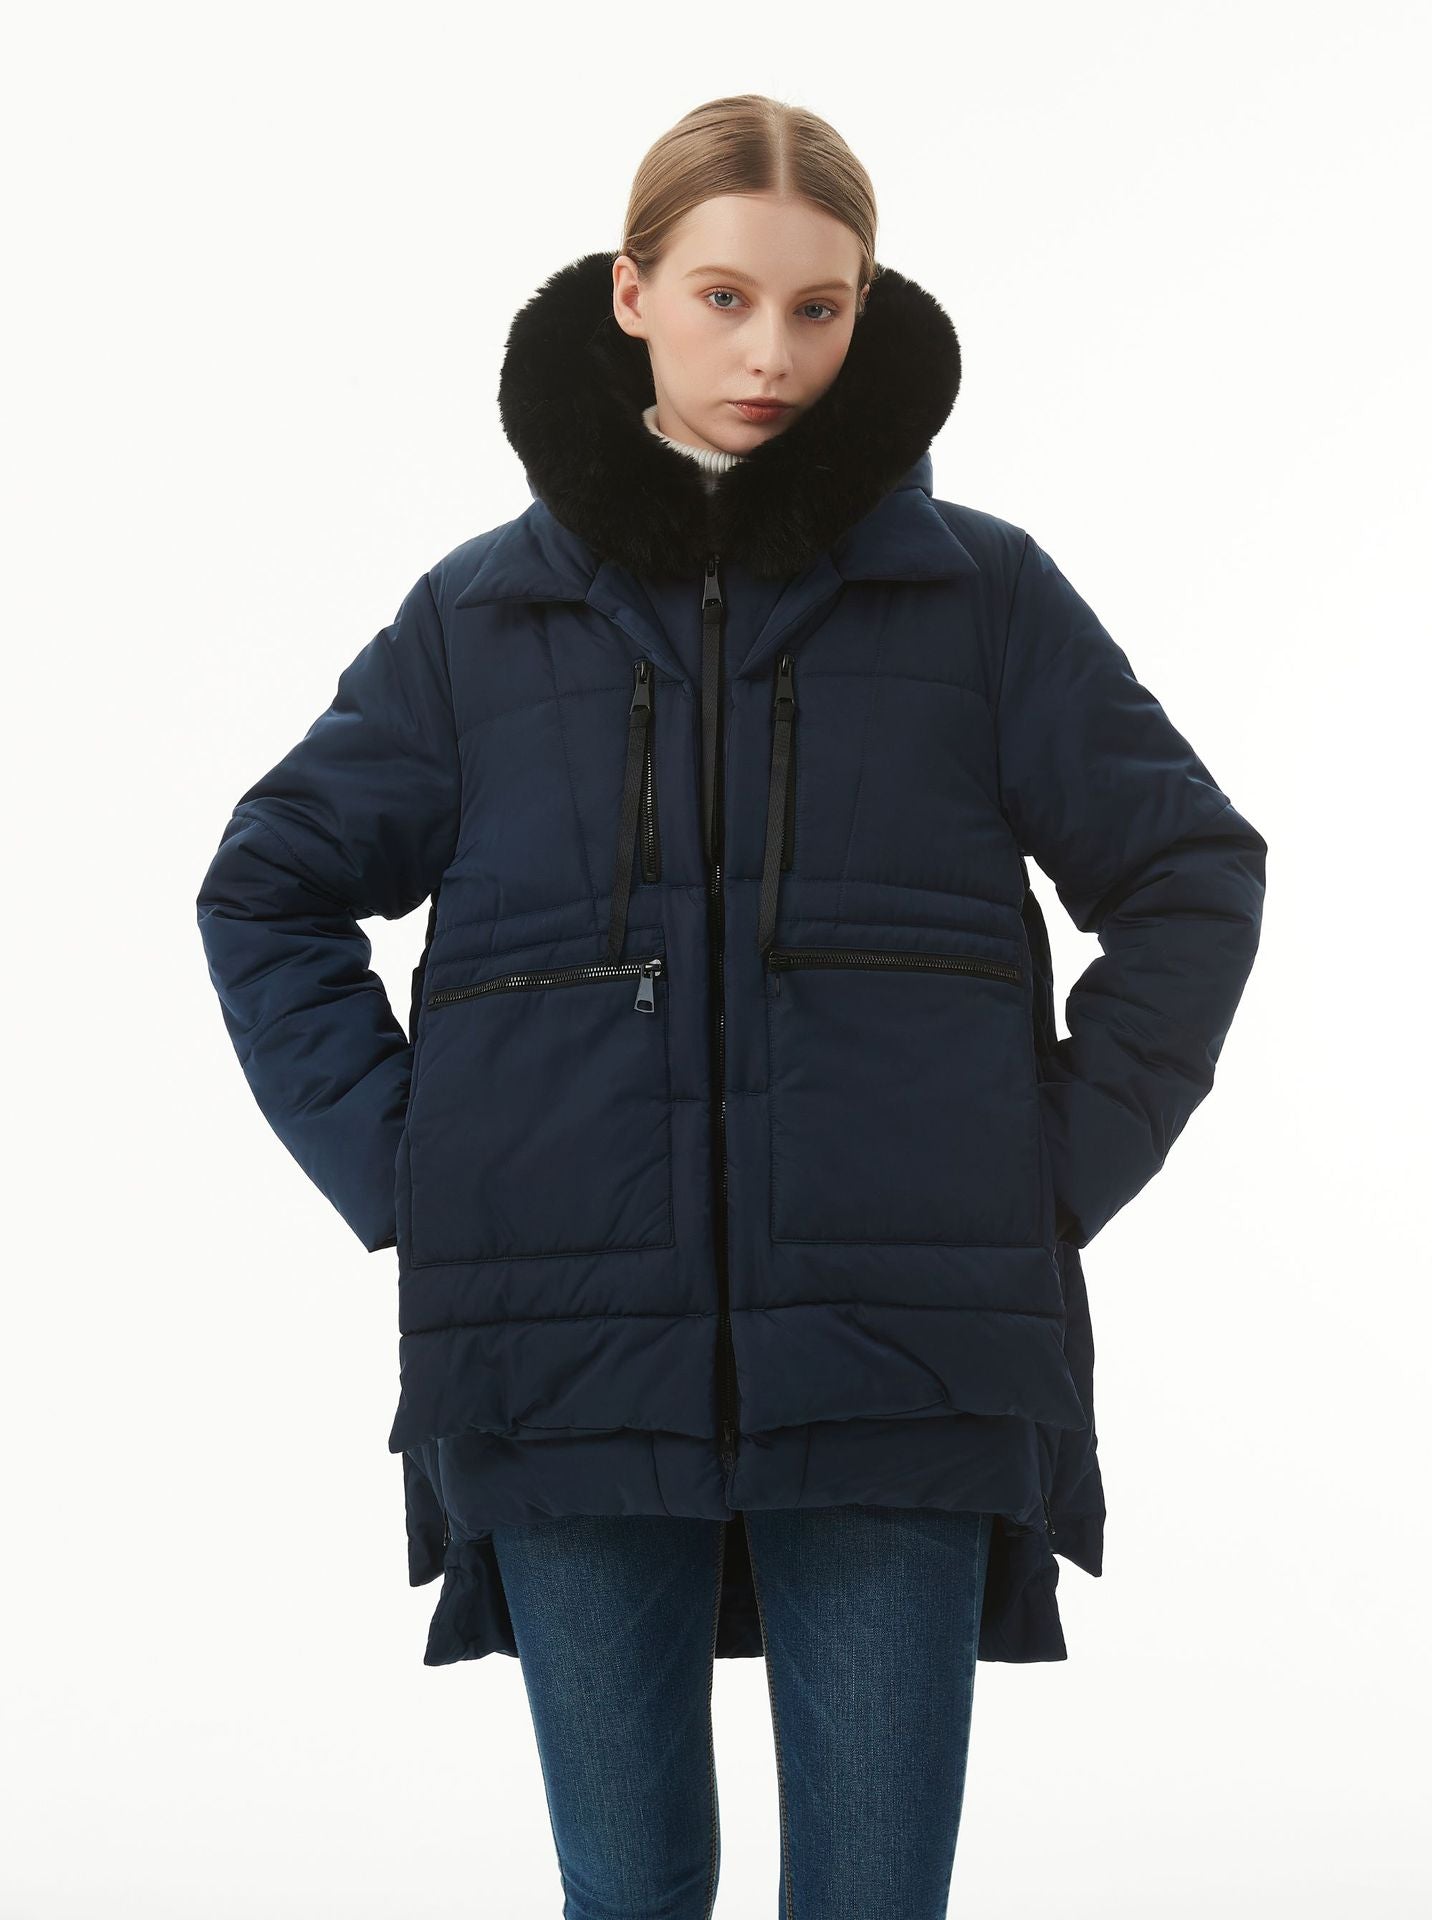 jackets  | Women's Casual Hooded Middle Long Cotton-padded Coat | Dark Blue |  L| thecurvestory.myshopify.com